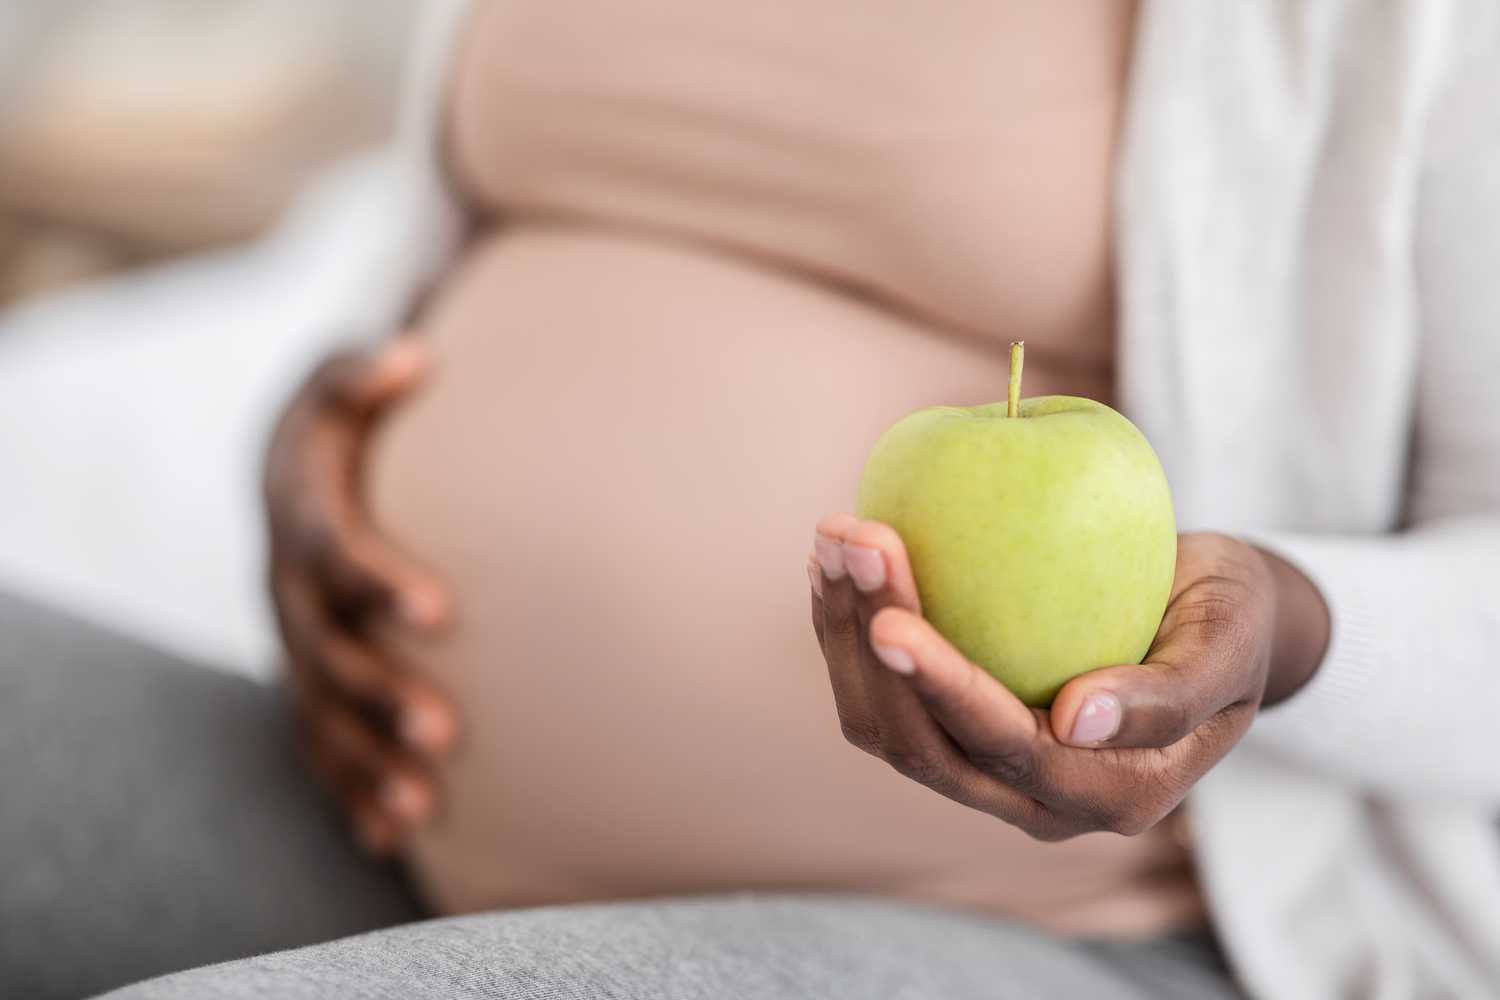 Green Apples During Pregnancy: Is it Safe? - Being The Parent